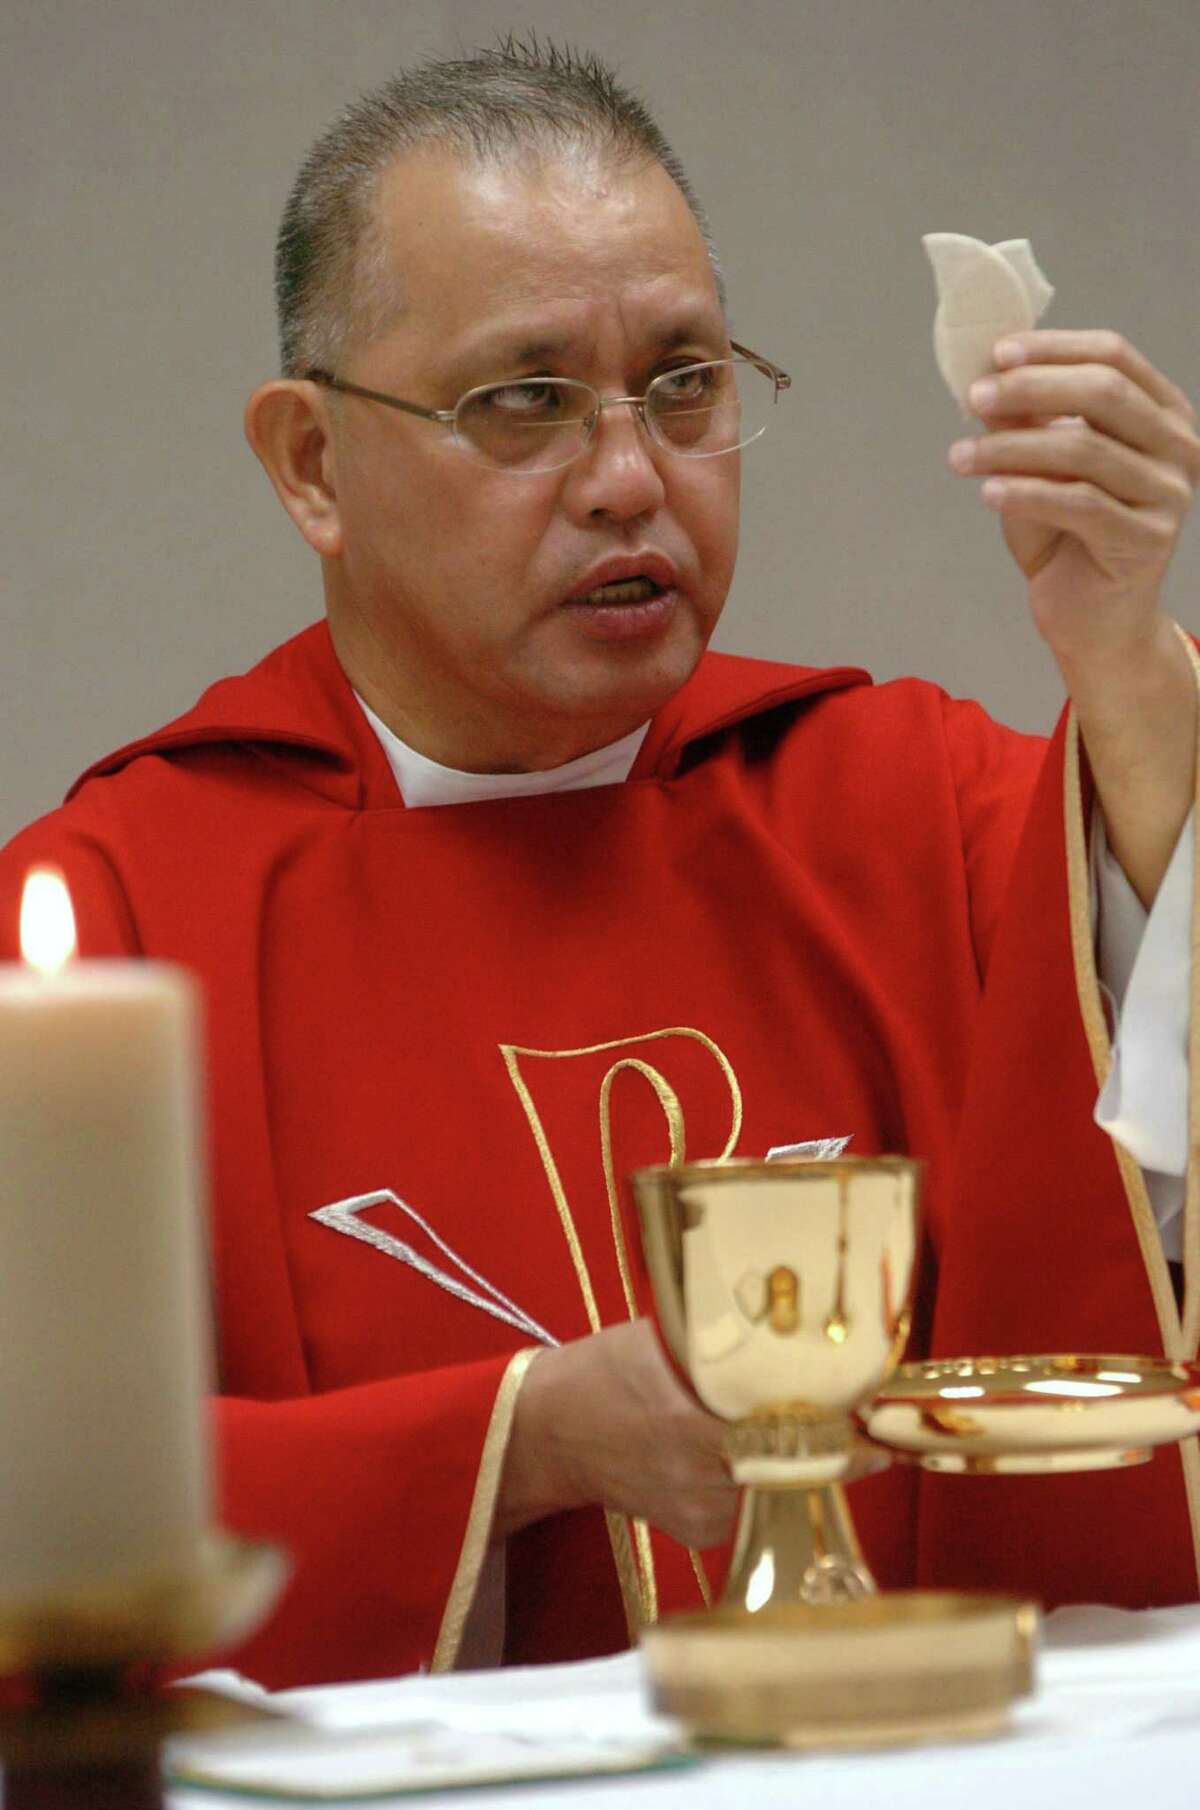 The Rev. Edmundo Paredes, in this 2008 photo, prepares for communion at St. Cecilia Catholic Church in Dallas. Paredes is accused of molesting teens and stealing from his parish.